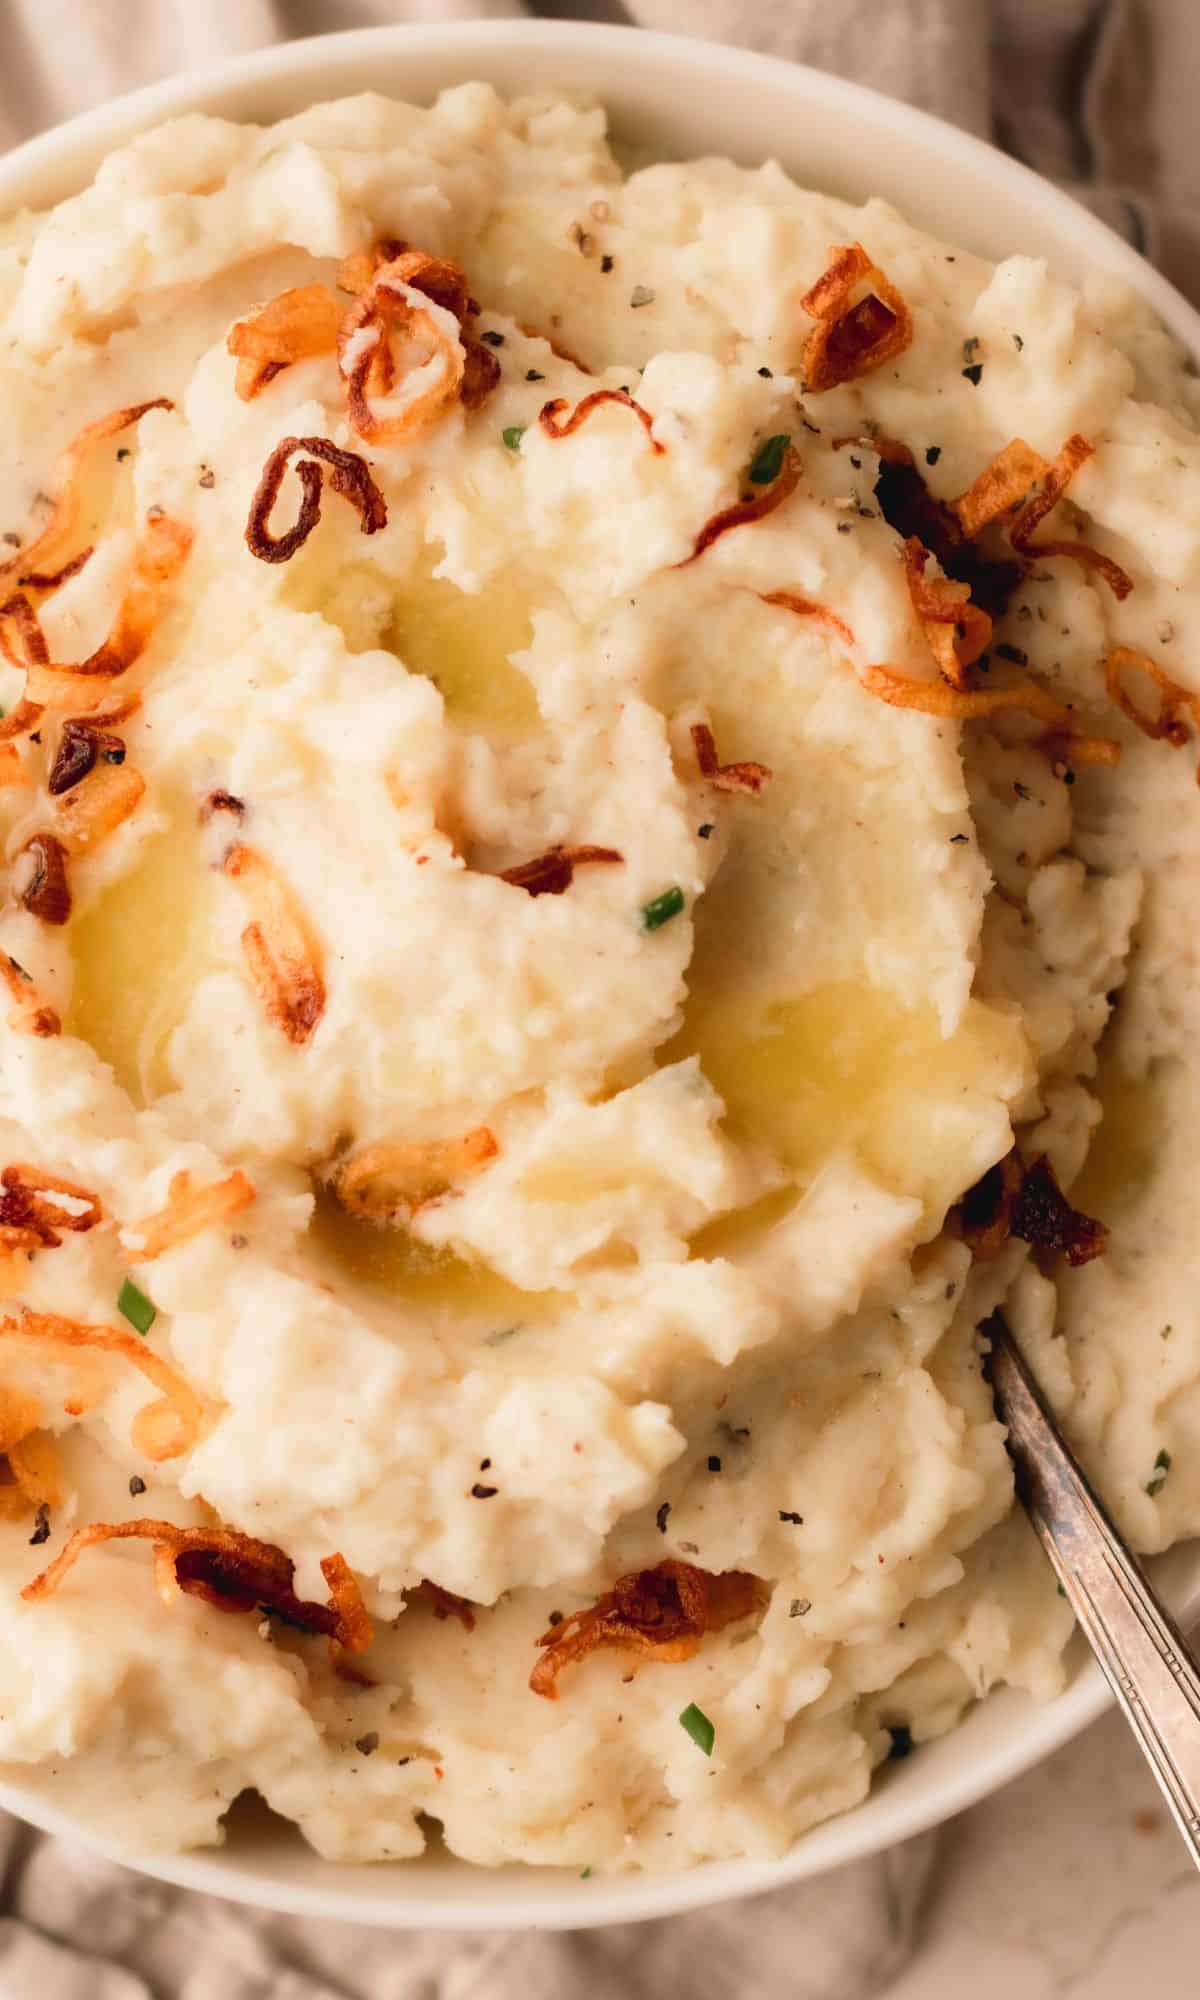 A bowl of mashed potatoes topped with crispy shallots and chives.